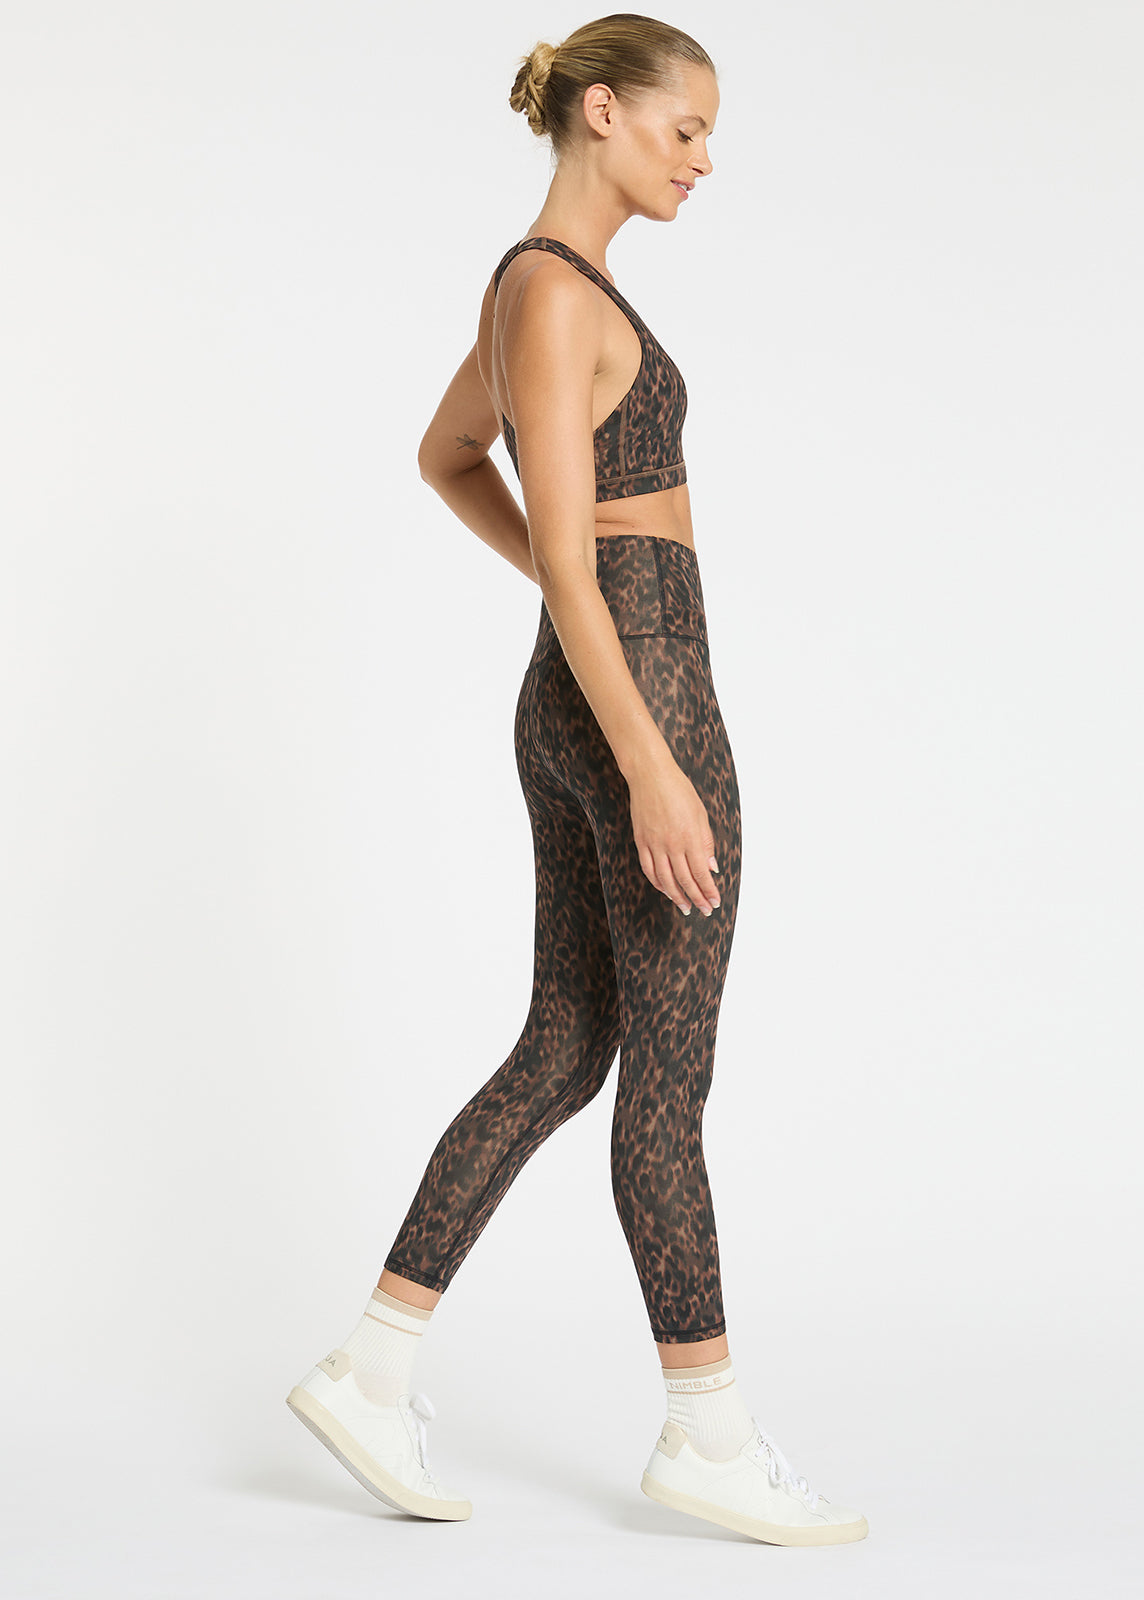 Nimble Activewear All Day High Rise Tights - AirRobe